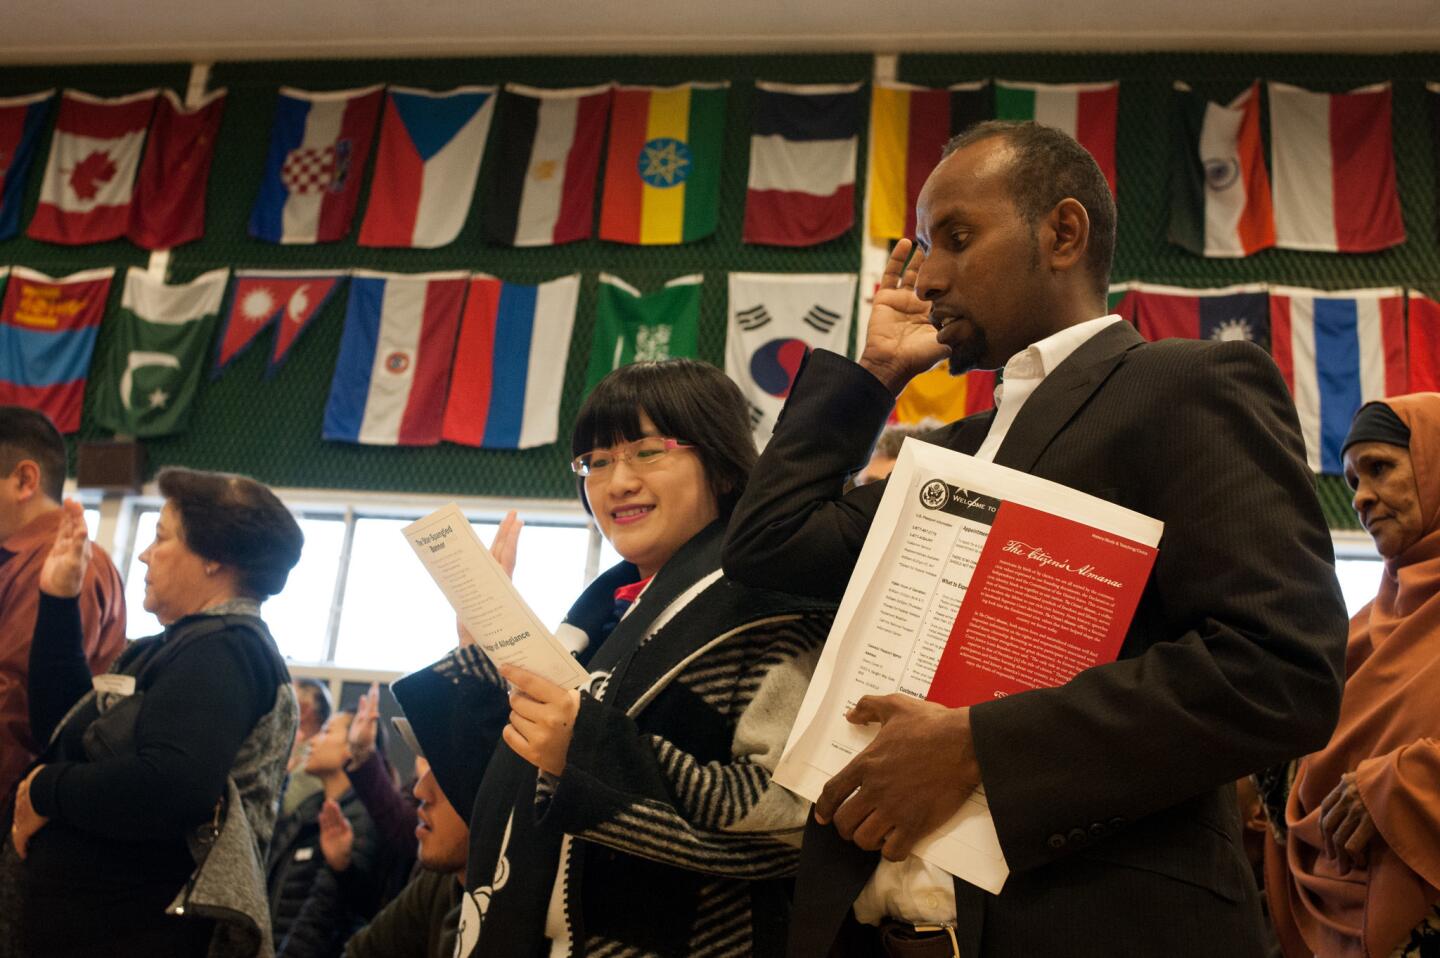 Omar Ibrahim, center right, and Yuanhao Zhuge, center left, take the oath of allegiance during a naturalization ceremony at Dunn Elementary in Fort Collins, Colo., on Feb. 3, 2017. Twenty-six people from 13 countries became U.S. citizens at the ceremony.